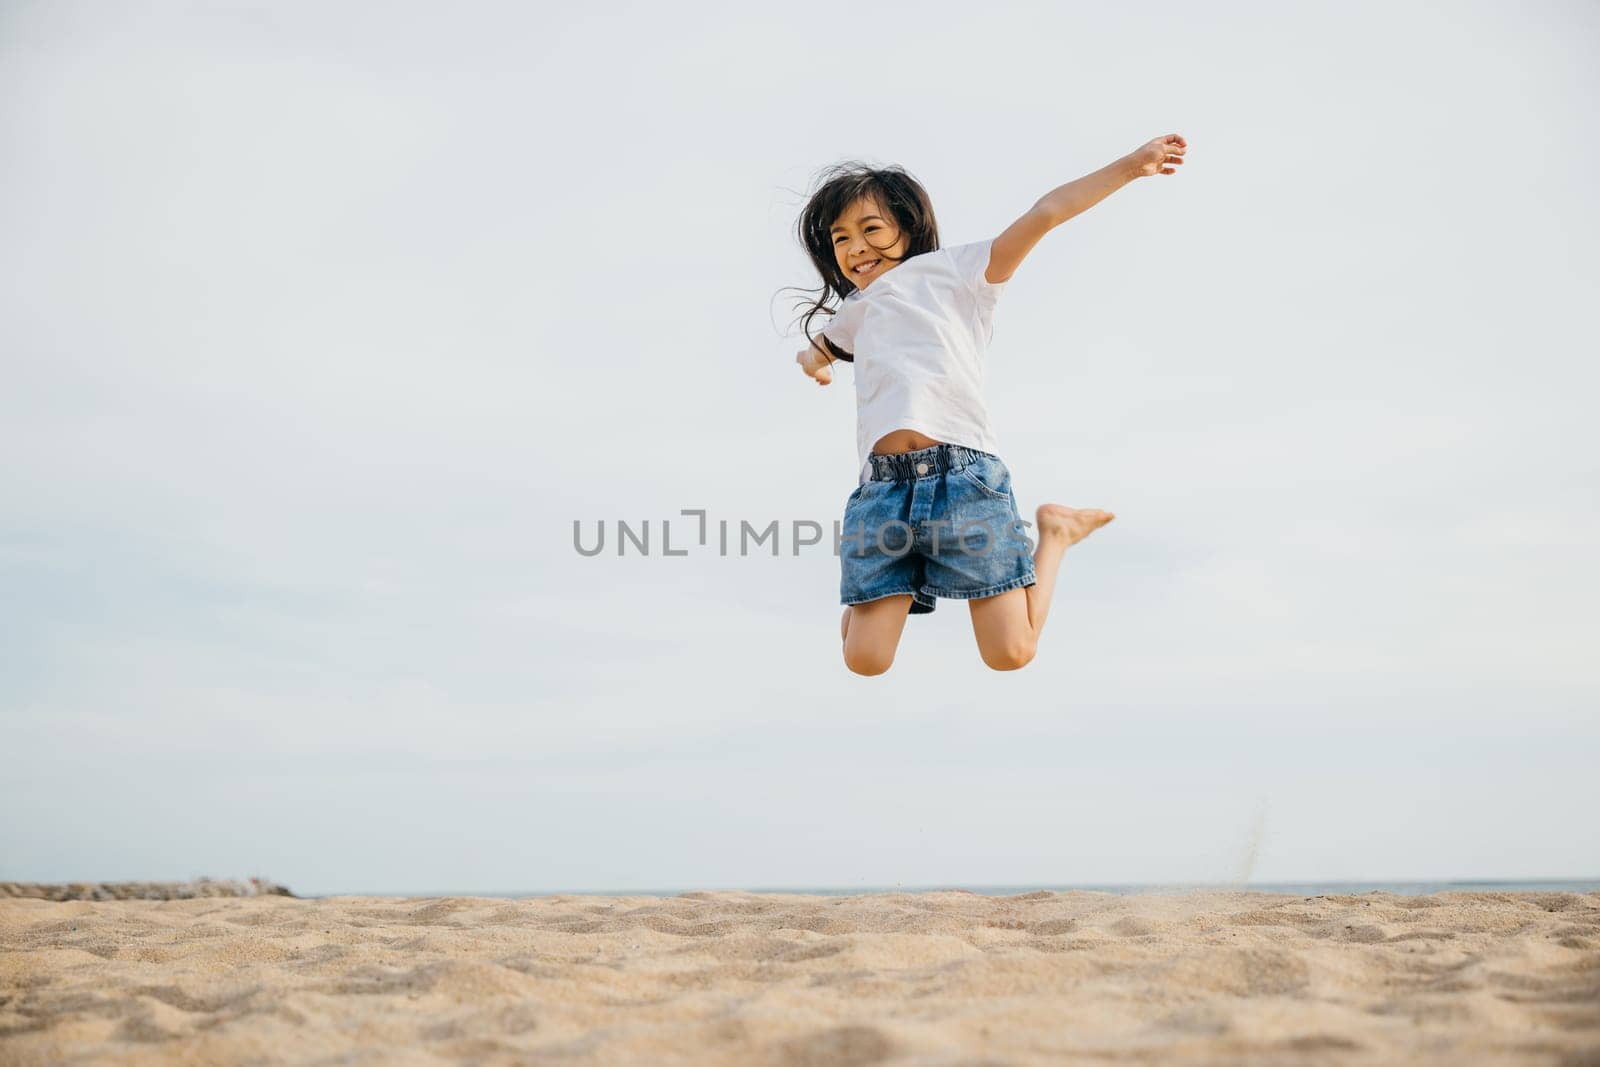 In the Caribbean sun a little girl jumps on the beach radiating happiness. Playful motion vitality and family enjoyment create a portrait of joyful childhood by Sorapop